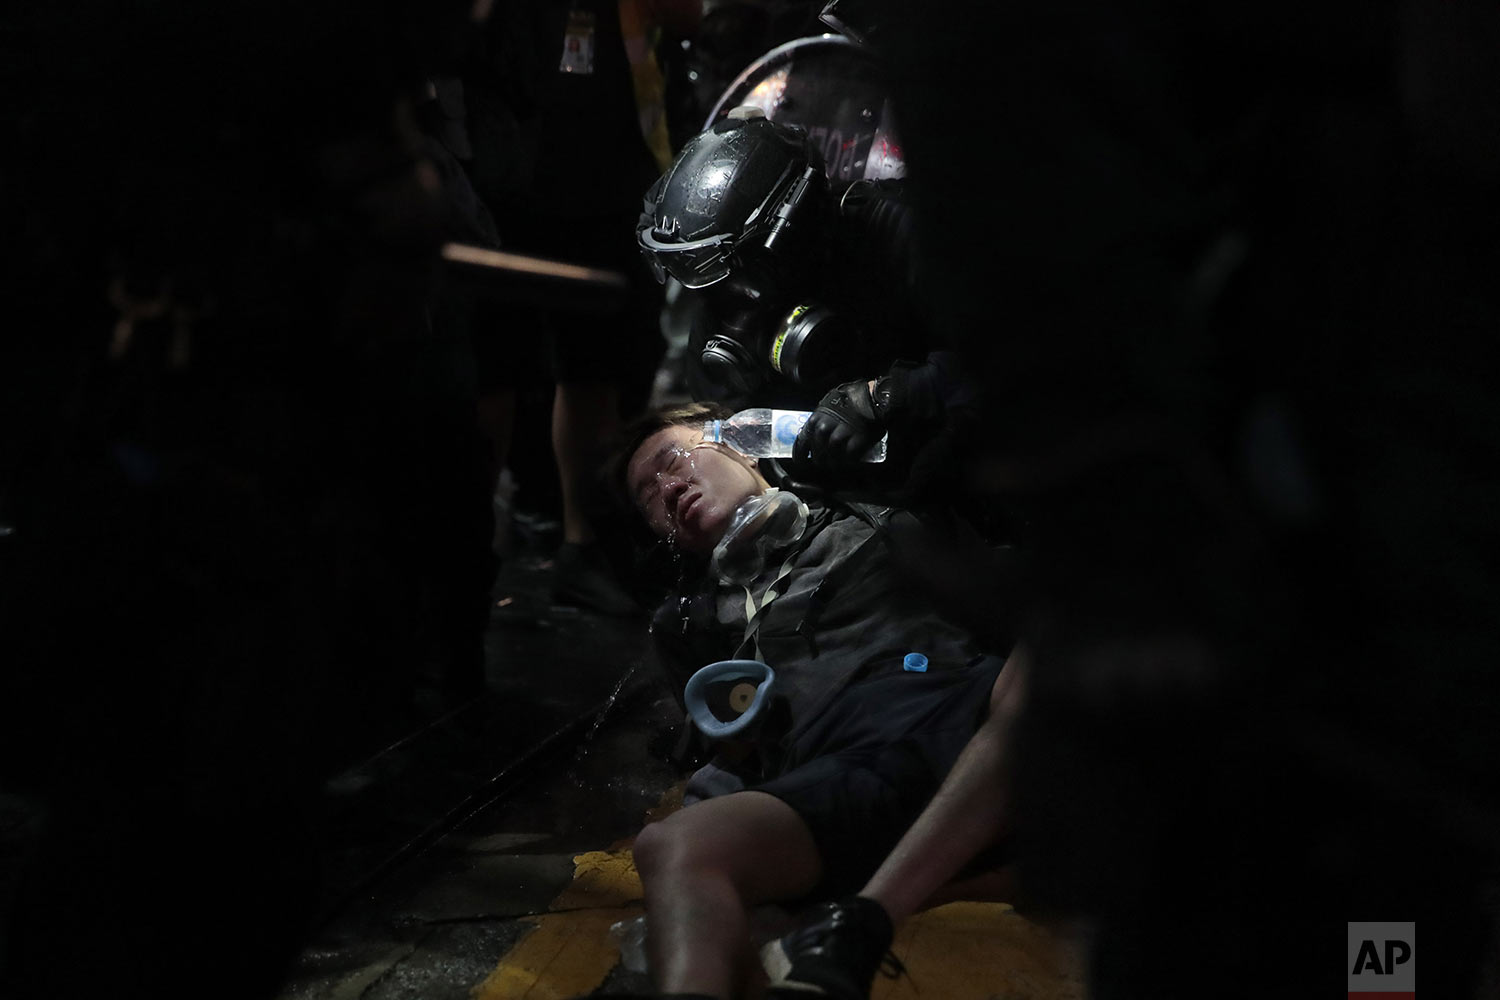  A policeman pours water on the face of a protestor who was detained in Hong Kong, Saturday, Aug. 31, 2019. (AP Photo/Jae C. Hong) 